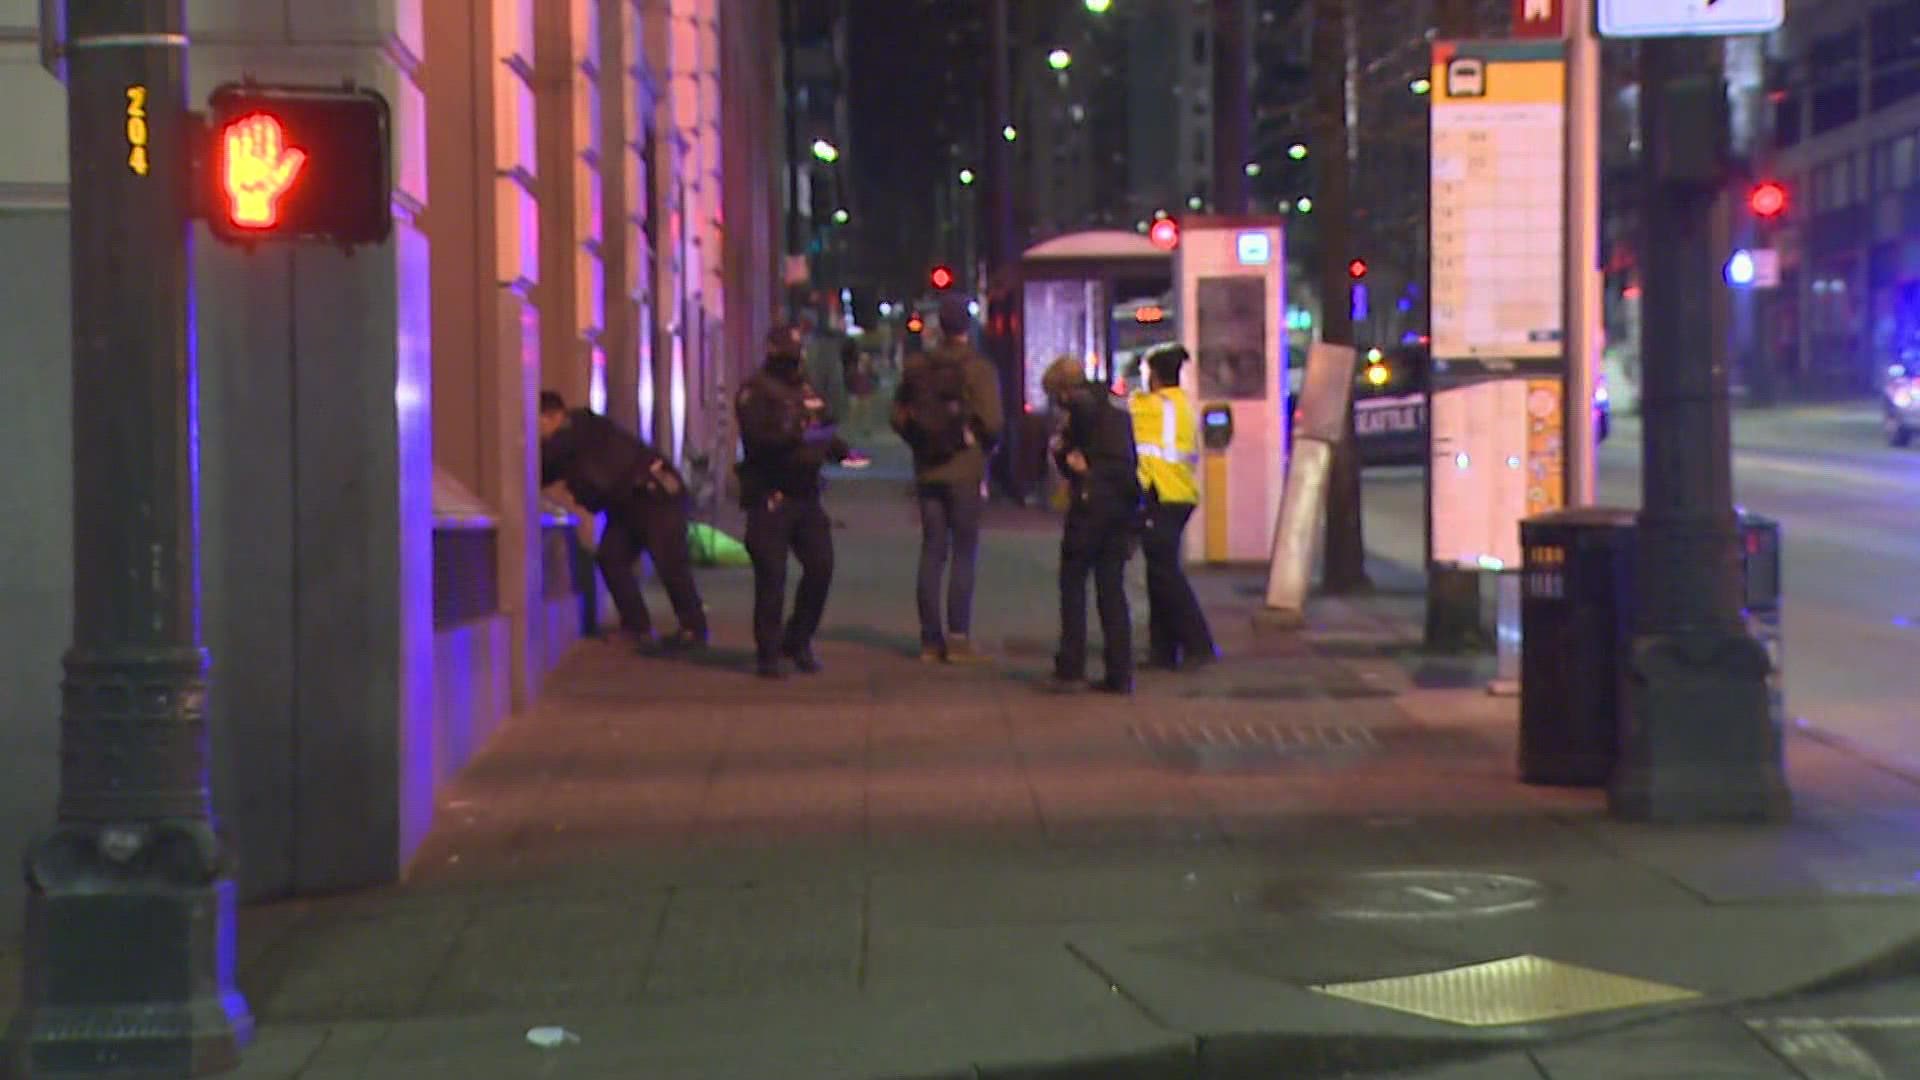 A man was hospitalized after being shot in the area of 3rd Ave. and Cherry St. near the King County Courthouse